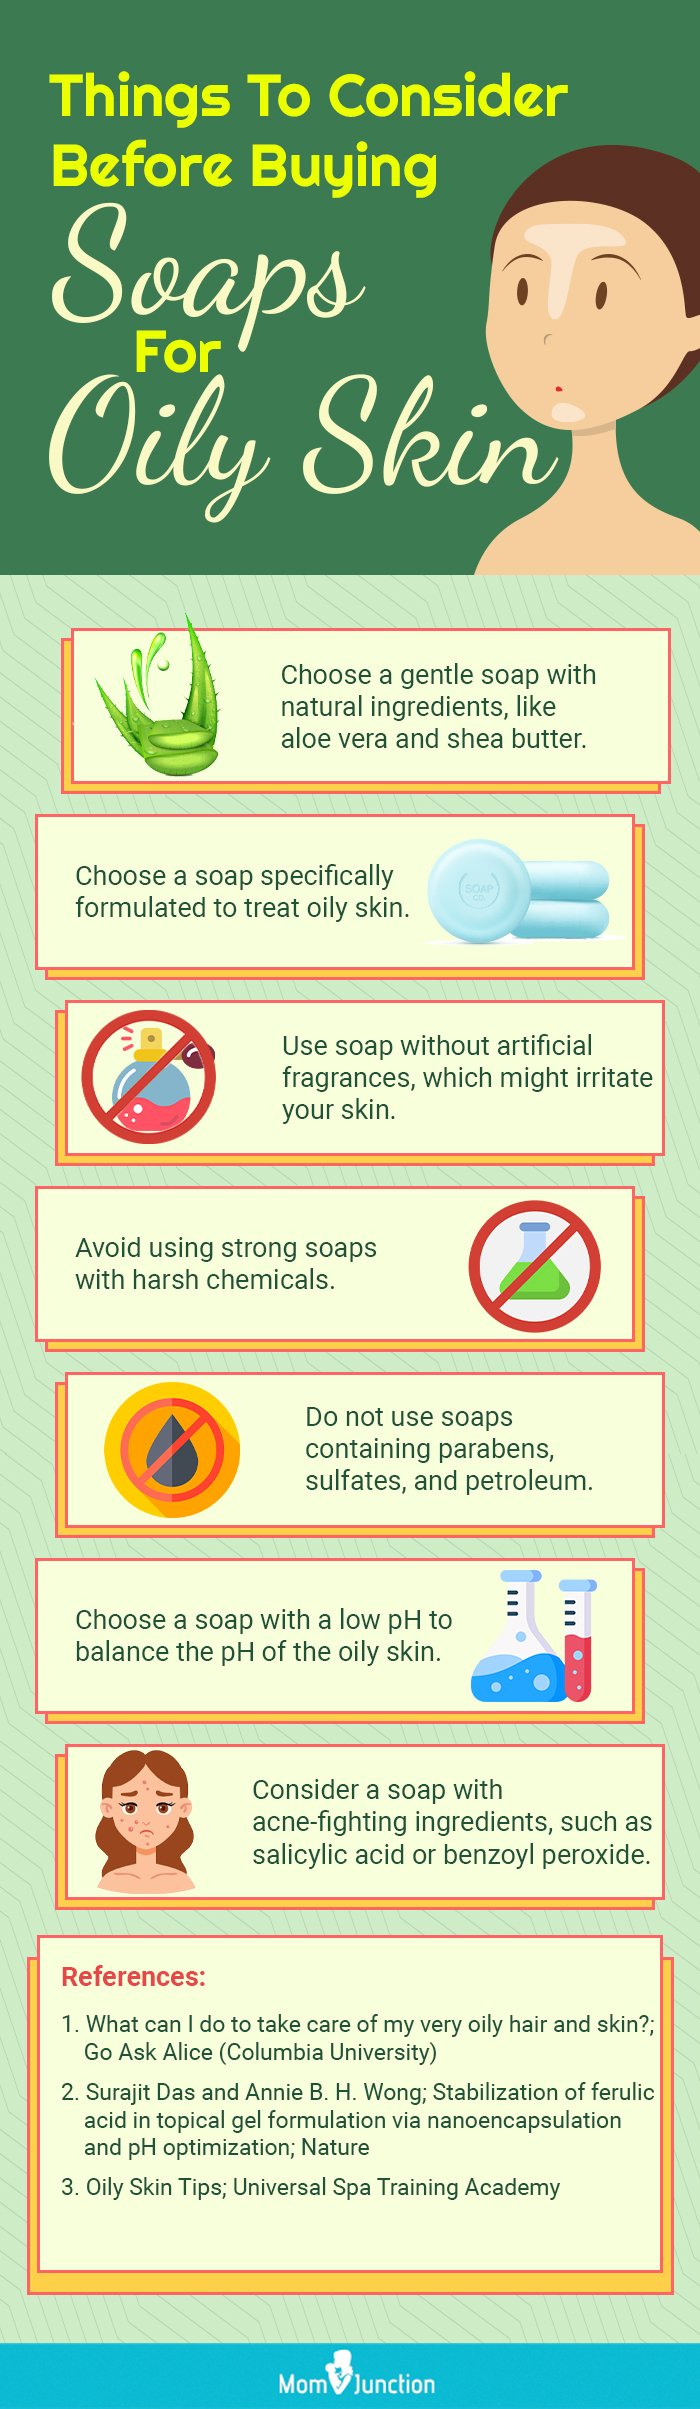 Things To Consider Before Buying Soaps For Oily Skin (infographic)